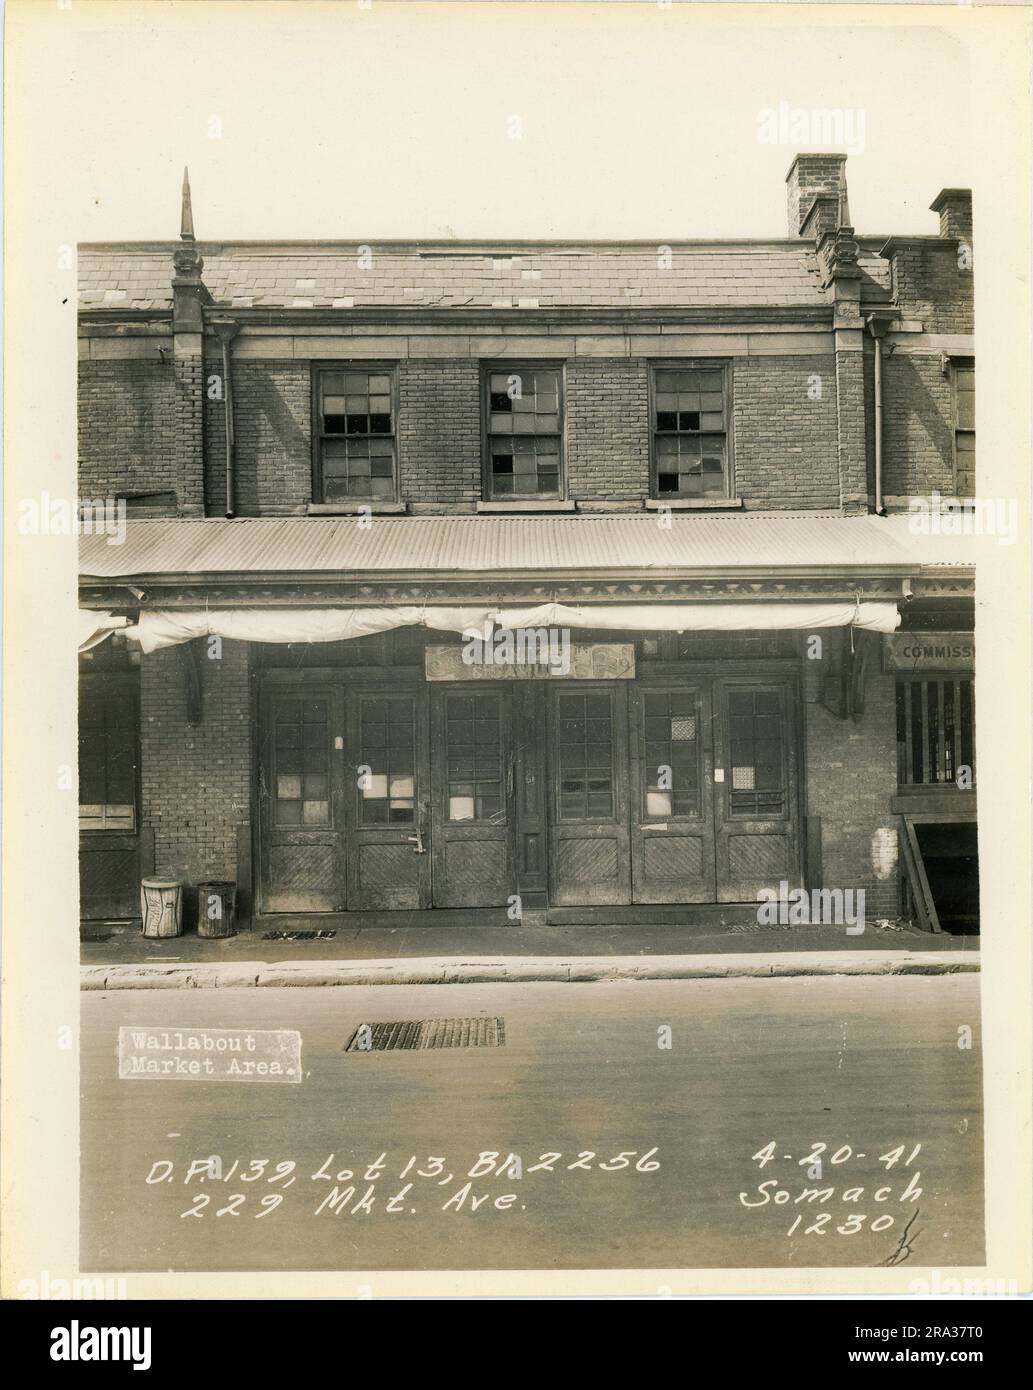 Photograph of exterior of lot 13, Bl. 2256, 229 Mkt. Ave, D.P. 139. Depicts market building exterior with sign for Mintzer & Samuels.. Stock Photo